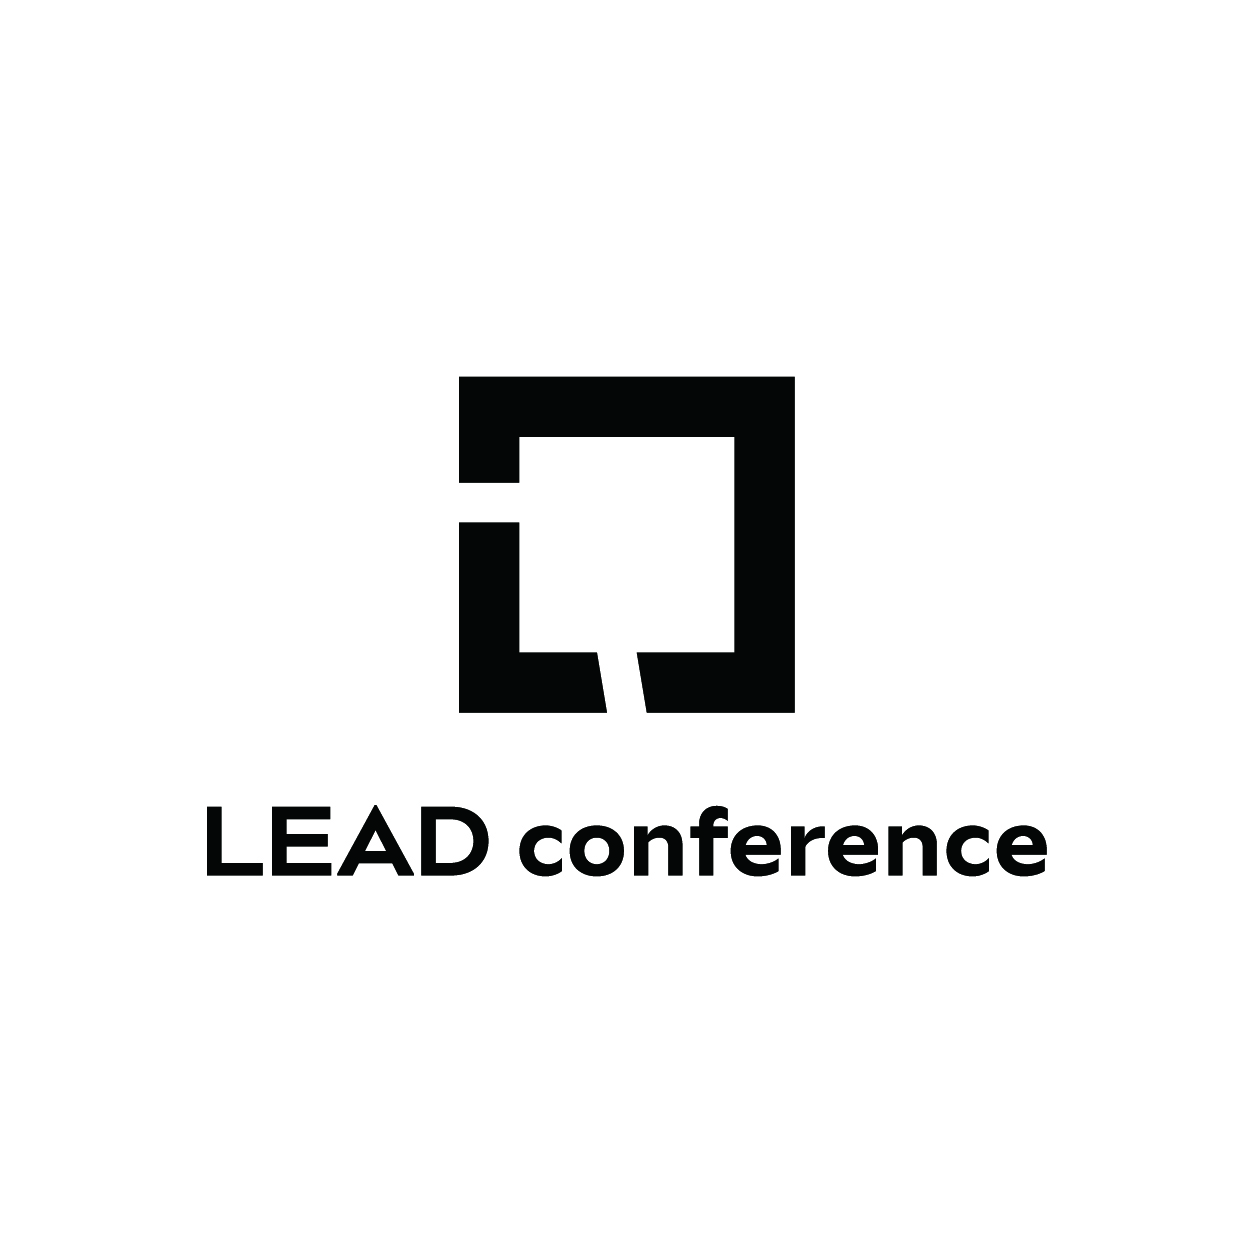 LEAD conference